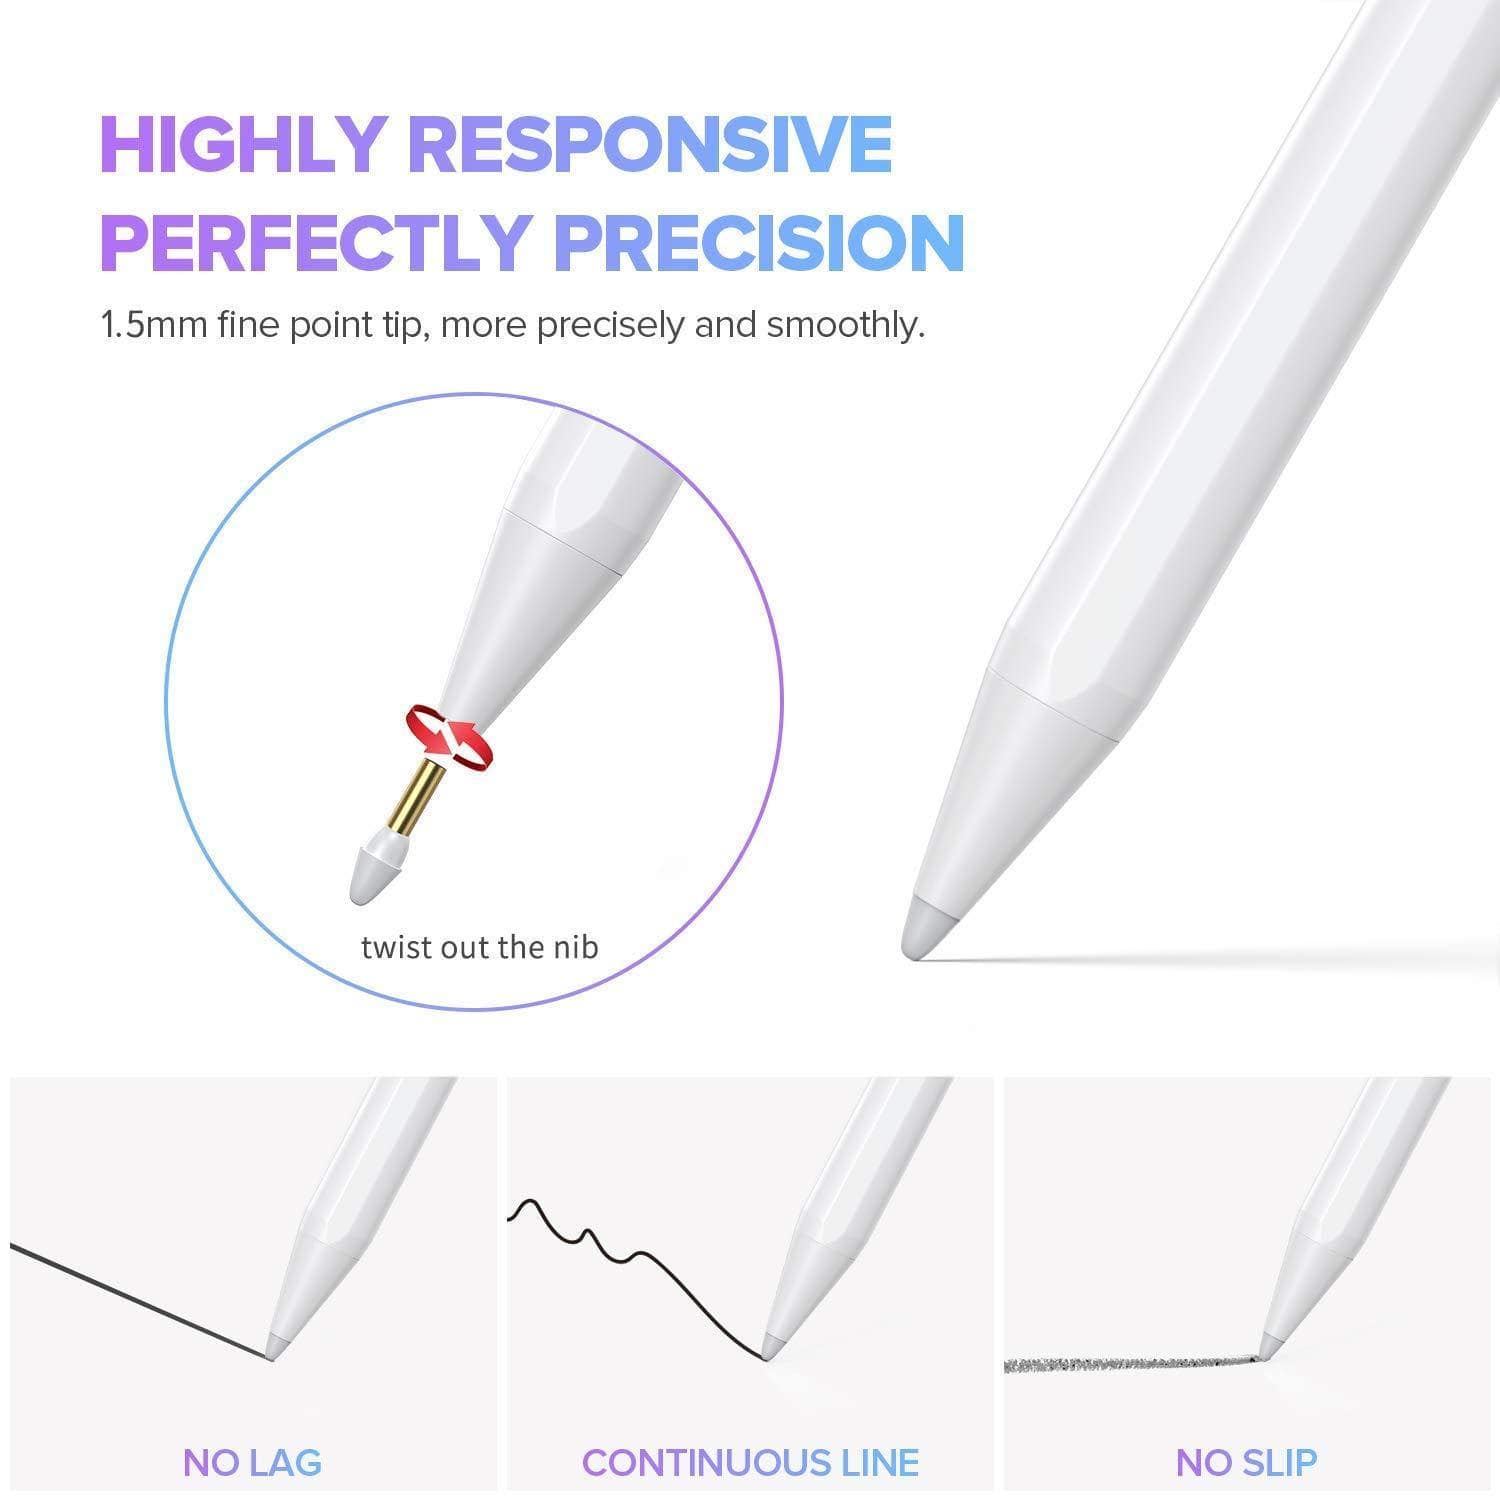 TOTU Active Stylus Pen for any iPad, iPad Pro, iPad Mini, iPad Air with Palm Rejection Active Pencil for Precise Writing/Drawing-Stylus-dealsplant